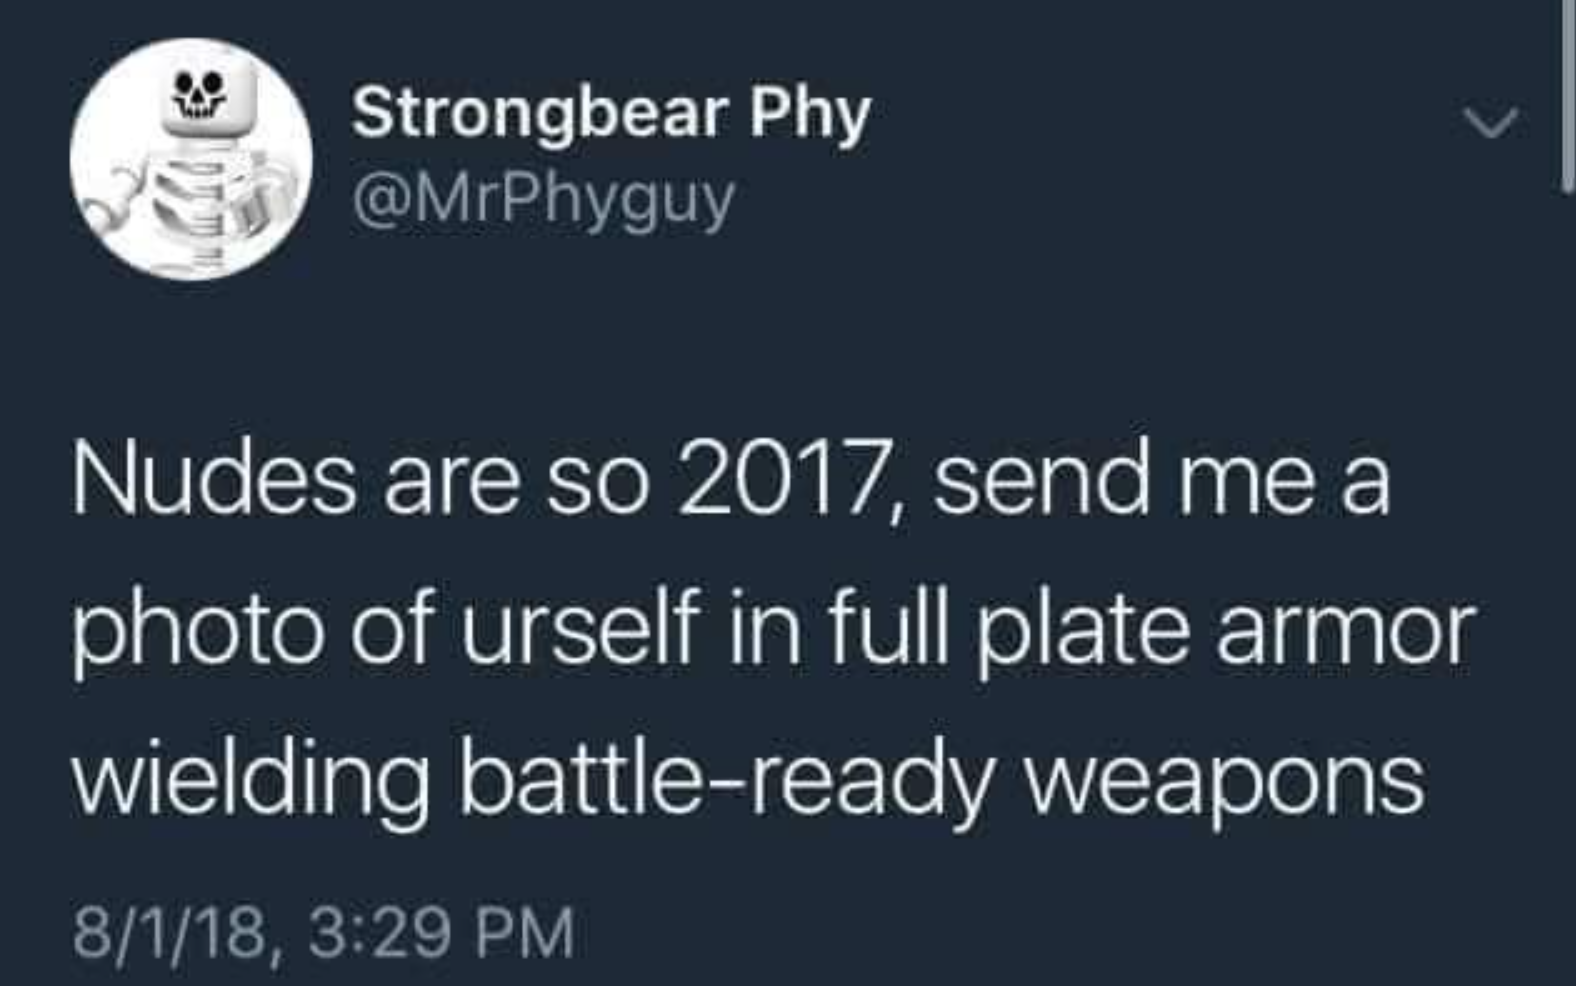 funny gaming memes - - - Strongbear Phy Nudes are so 2017, send me a photo of urself in full plate armor wielding battleready weapons 8118,